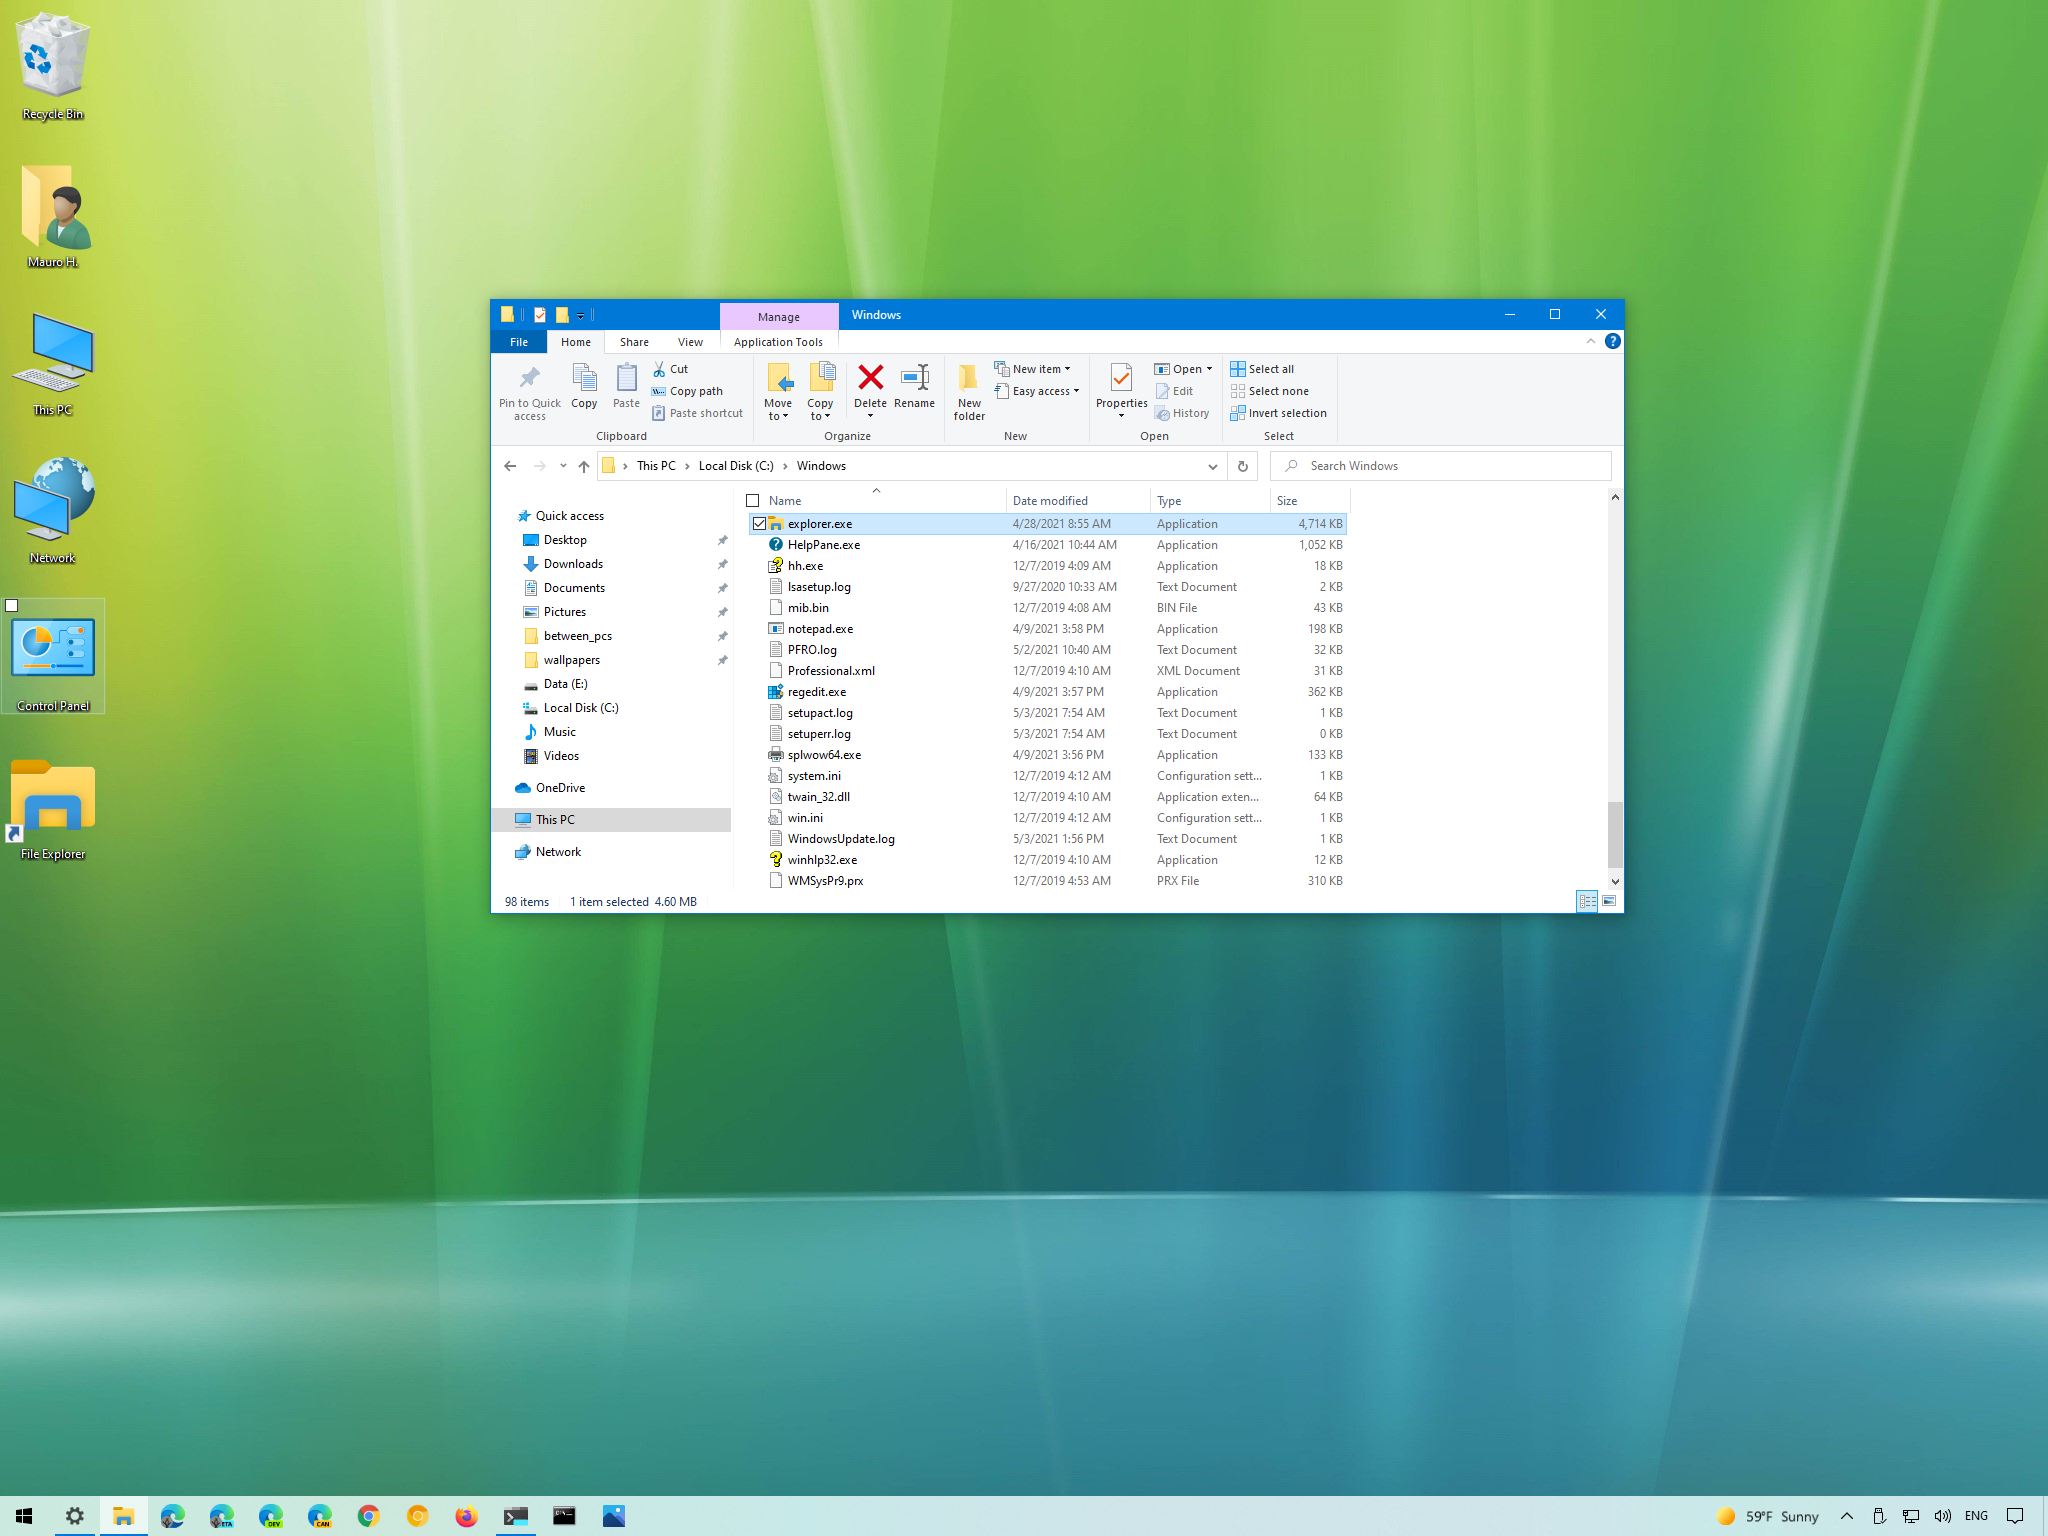 Open File Explorer by pressing Windows key + E.
Navigate to the following directory: C:\Users.